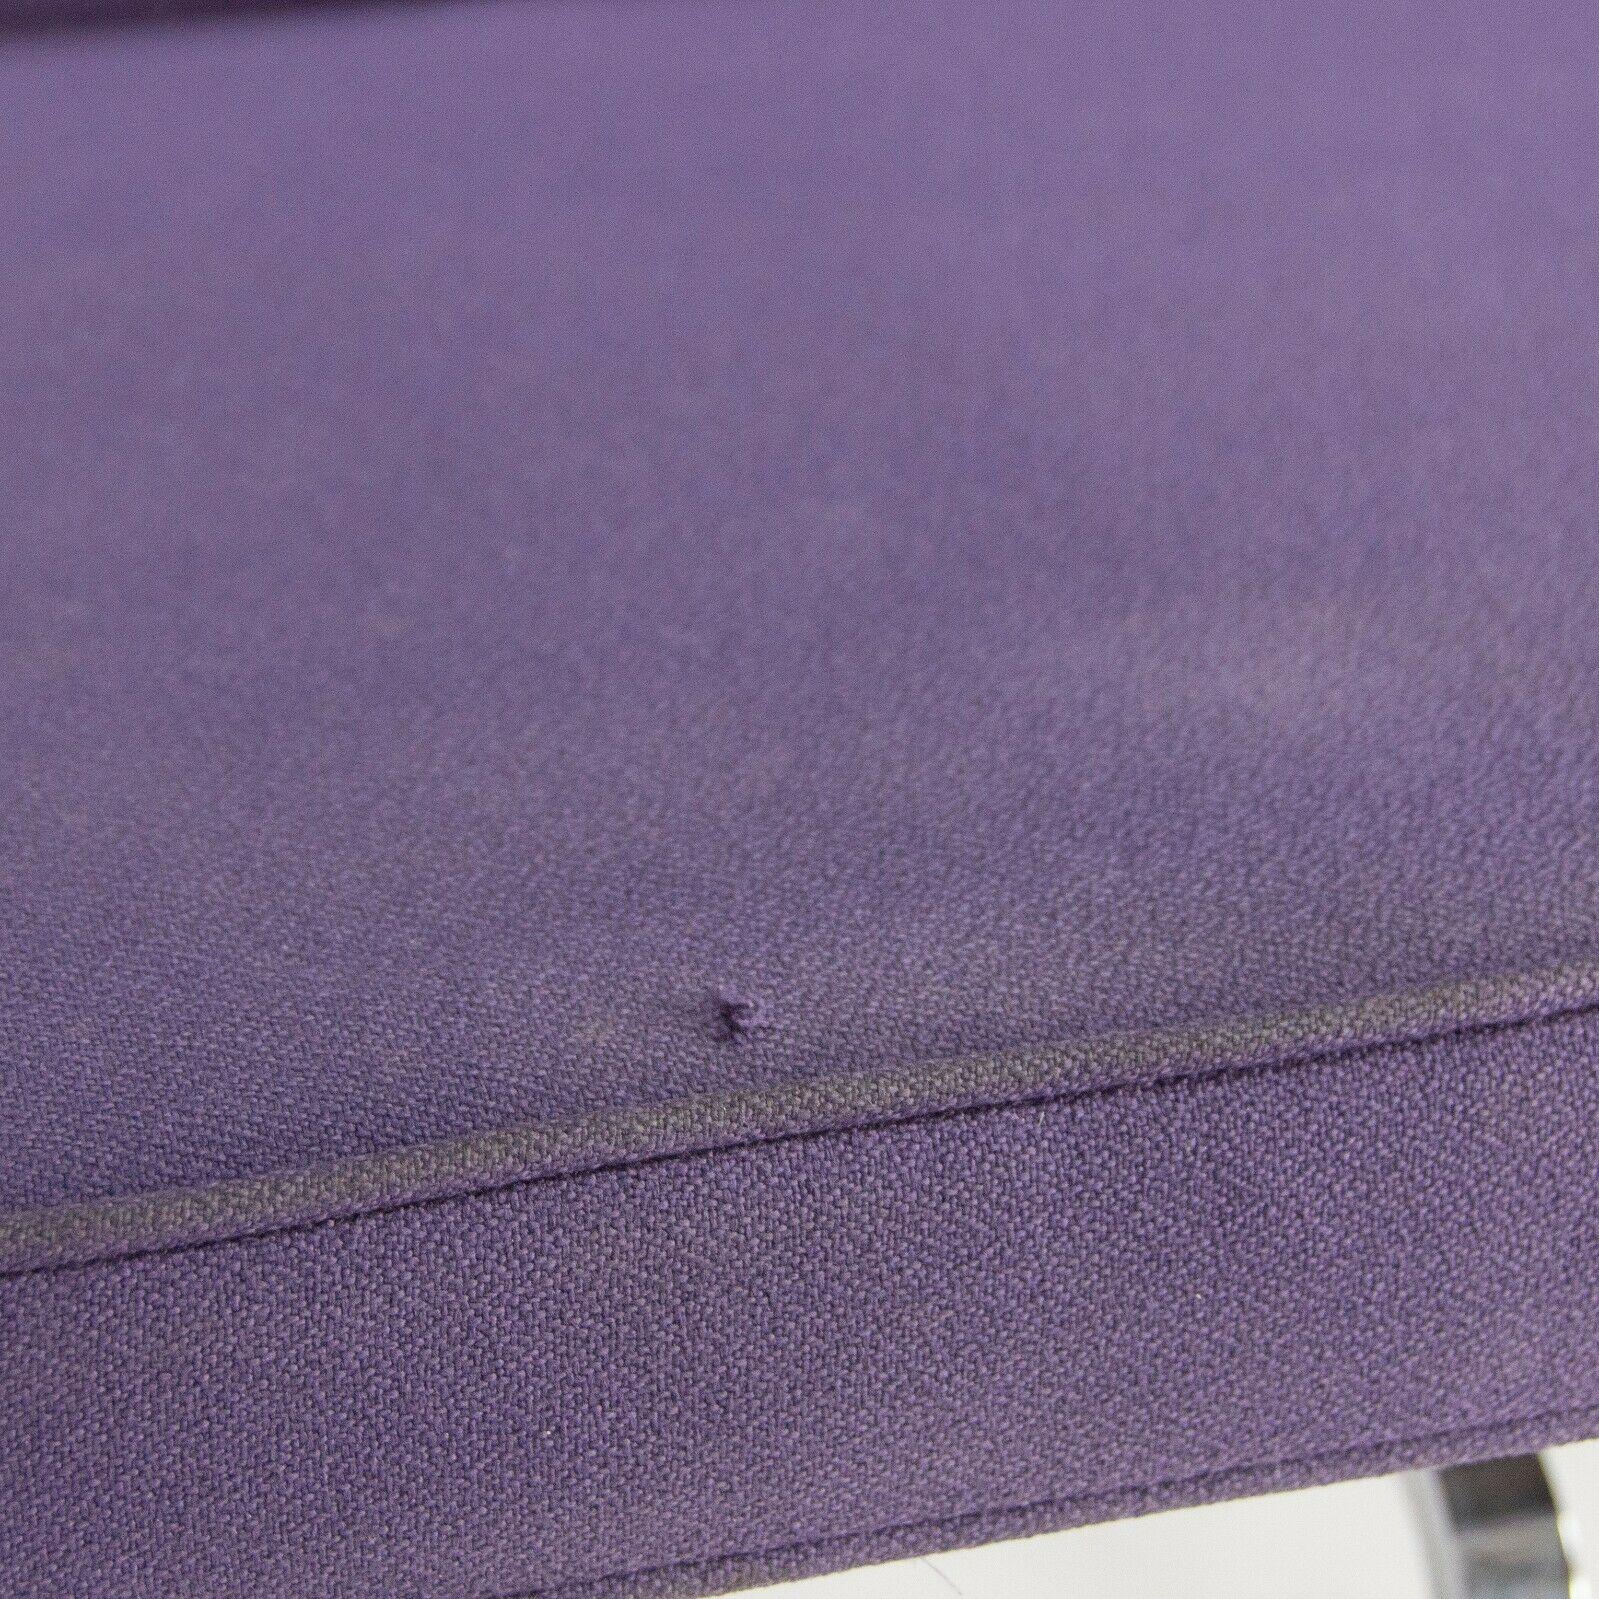 2006 Herman Miller Ray and Charles Eames Sofa Compact Purple Fabric Upholstery (Canapé compact en tissu violet) en vente 2